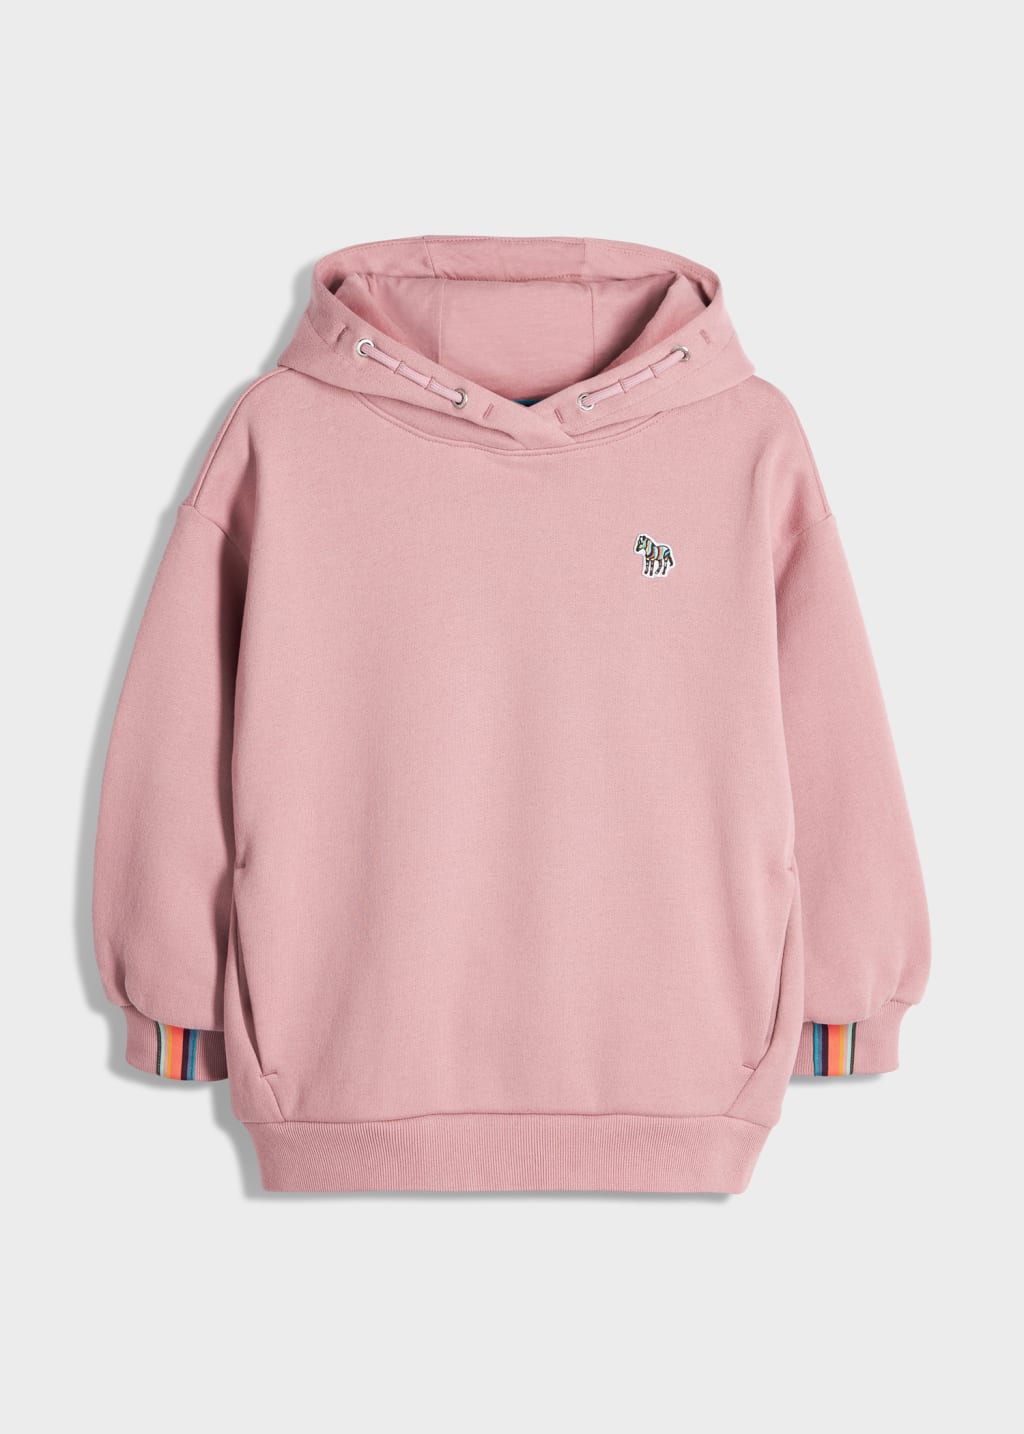 Front View - 2-13 Years Pink Cotton Zebra Pullover Hoodie Paul Smith